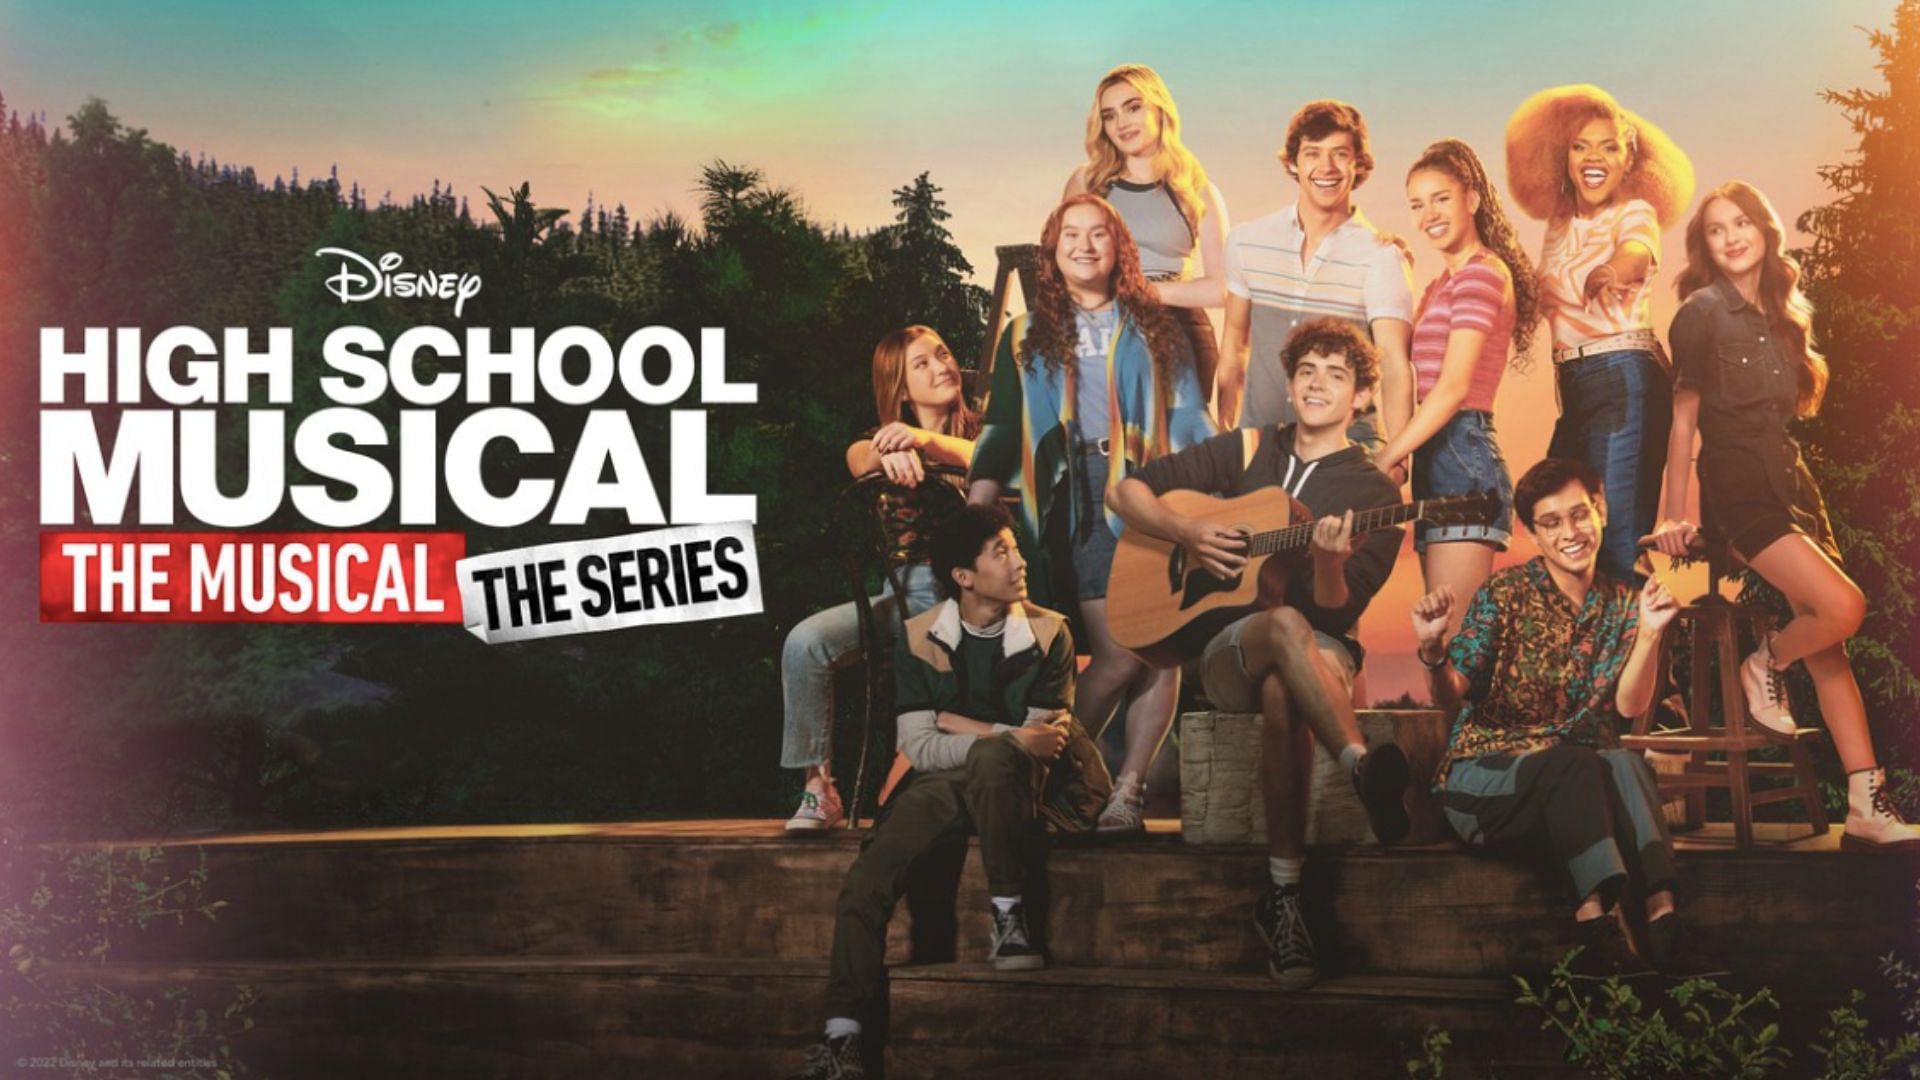 High School Musical: The Musical: The Series on Disney+ (Image via Rotten Tomatoes)